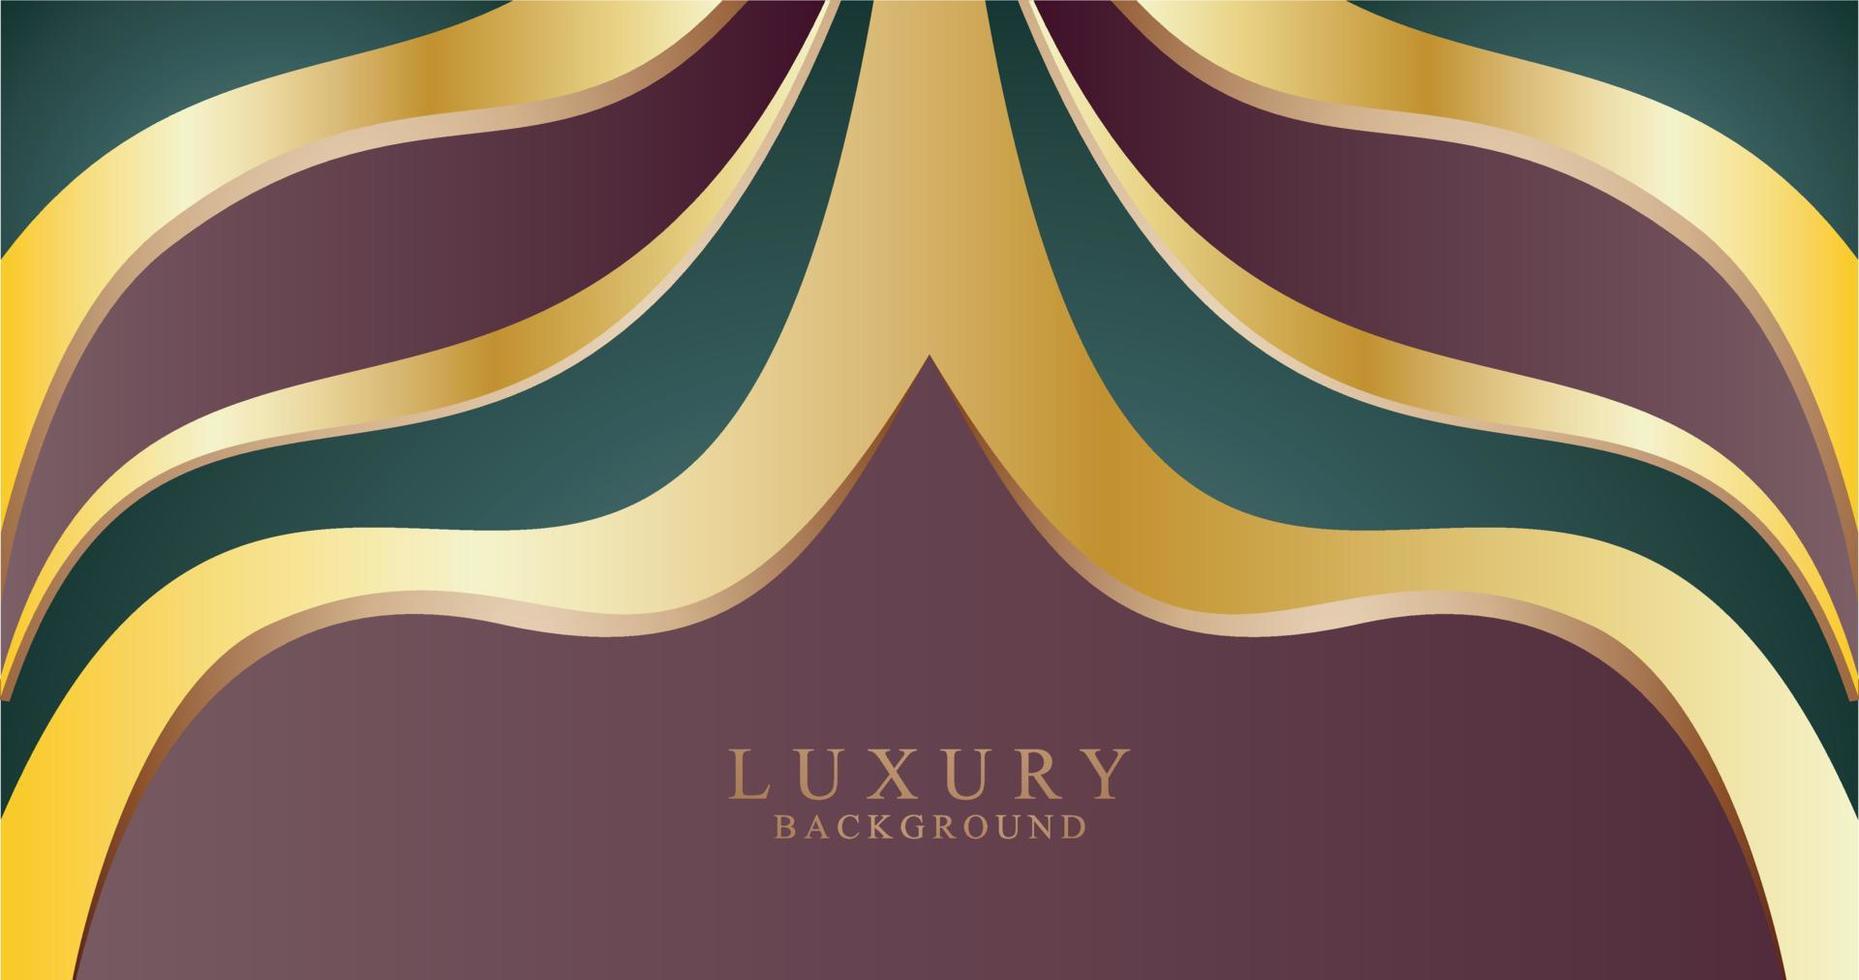 Background luxury violet and gold vector